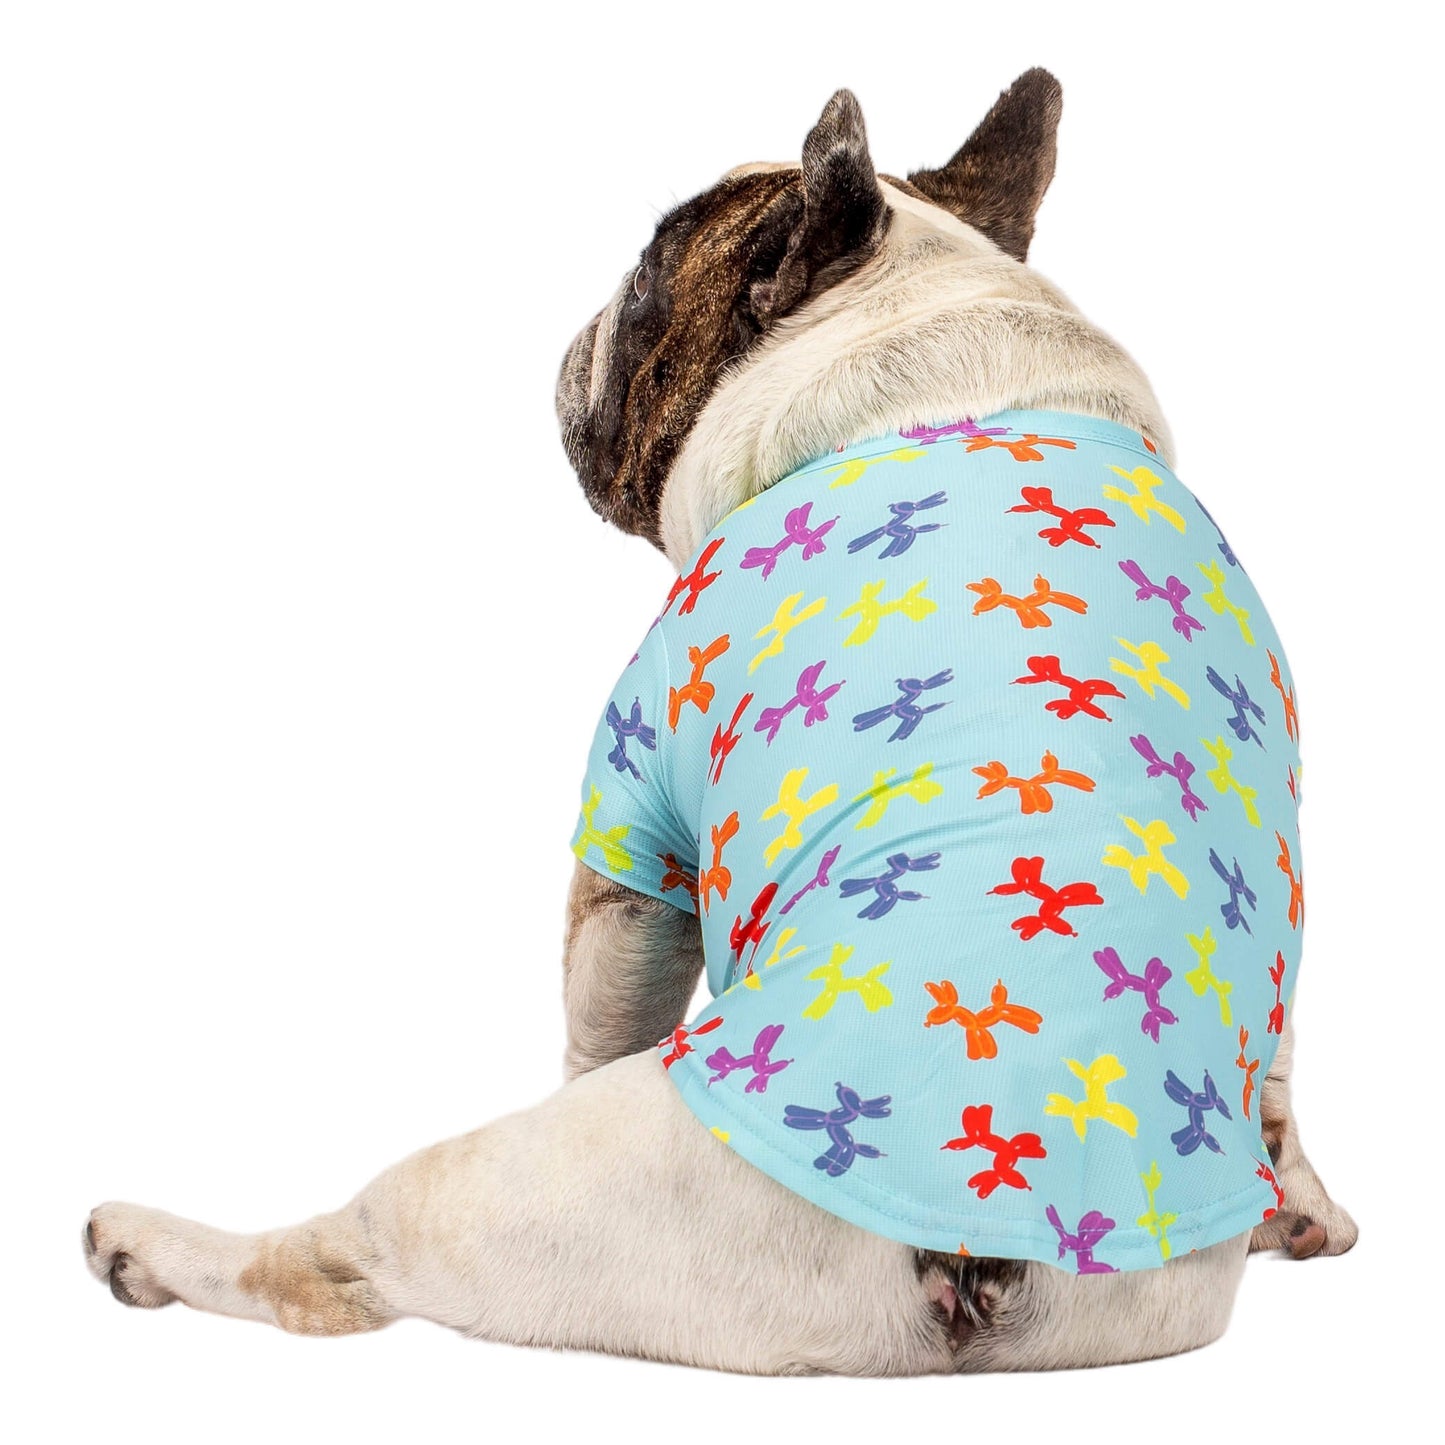 A Brindle pied French Bulldog facing away seated wearing Vibrant Hounds Balloon dog cooling shirt. It is blue with balloon dog shapes printed on it.